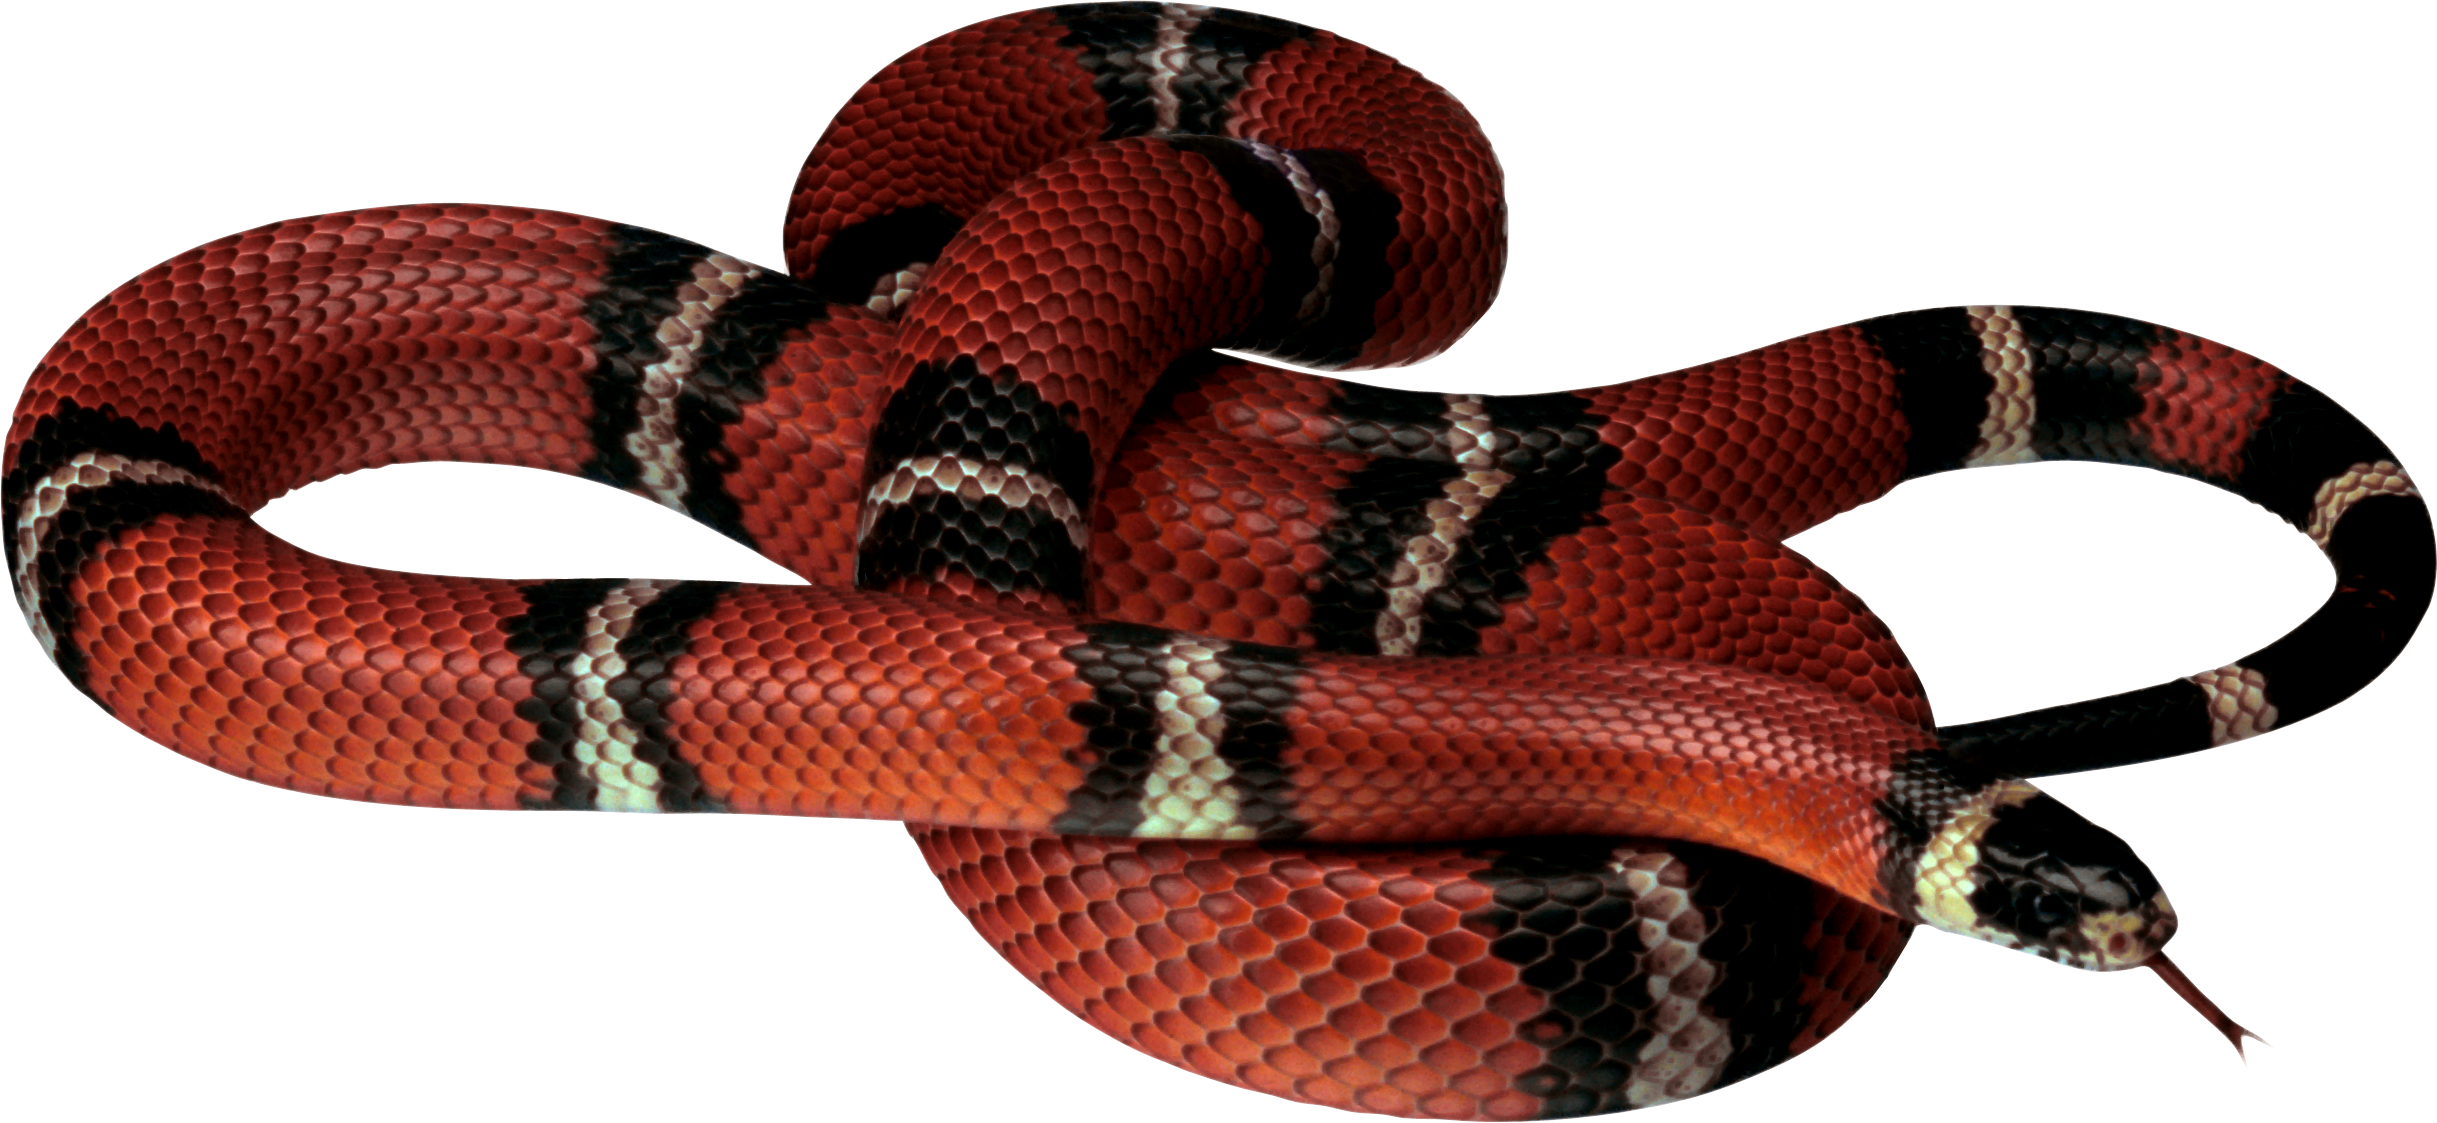 Snake Png Image Picture Download Free - Snake, Transparent background PNG HD thumbnail